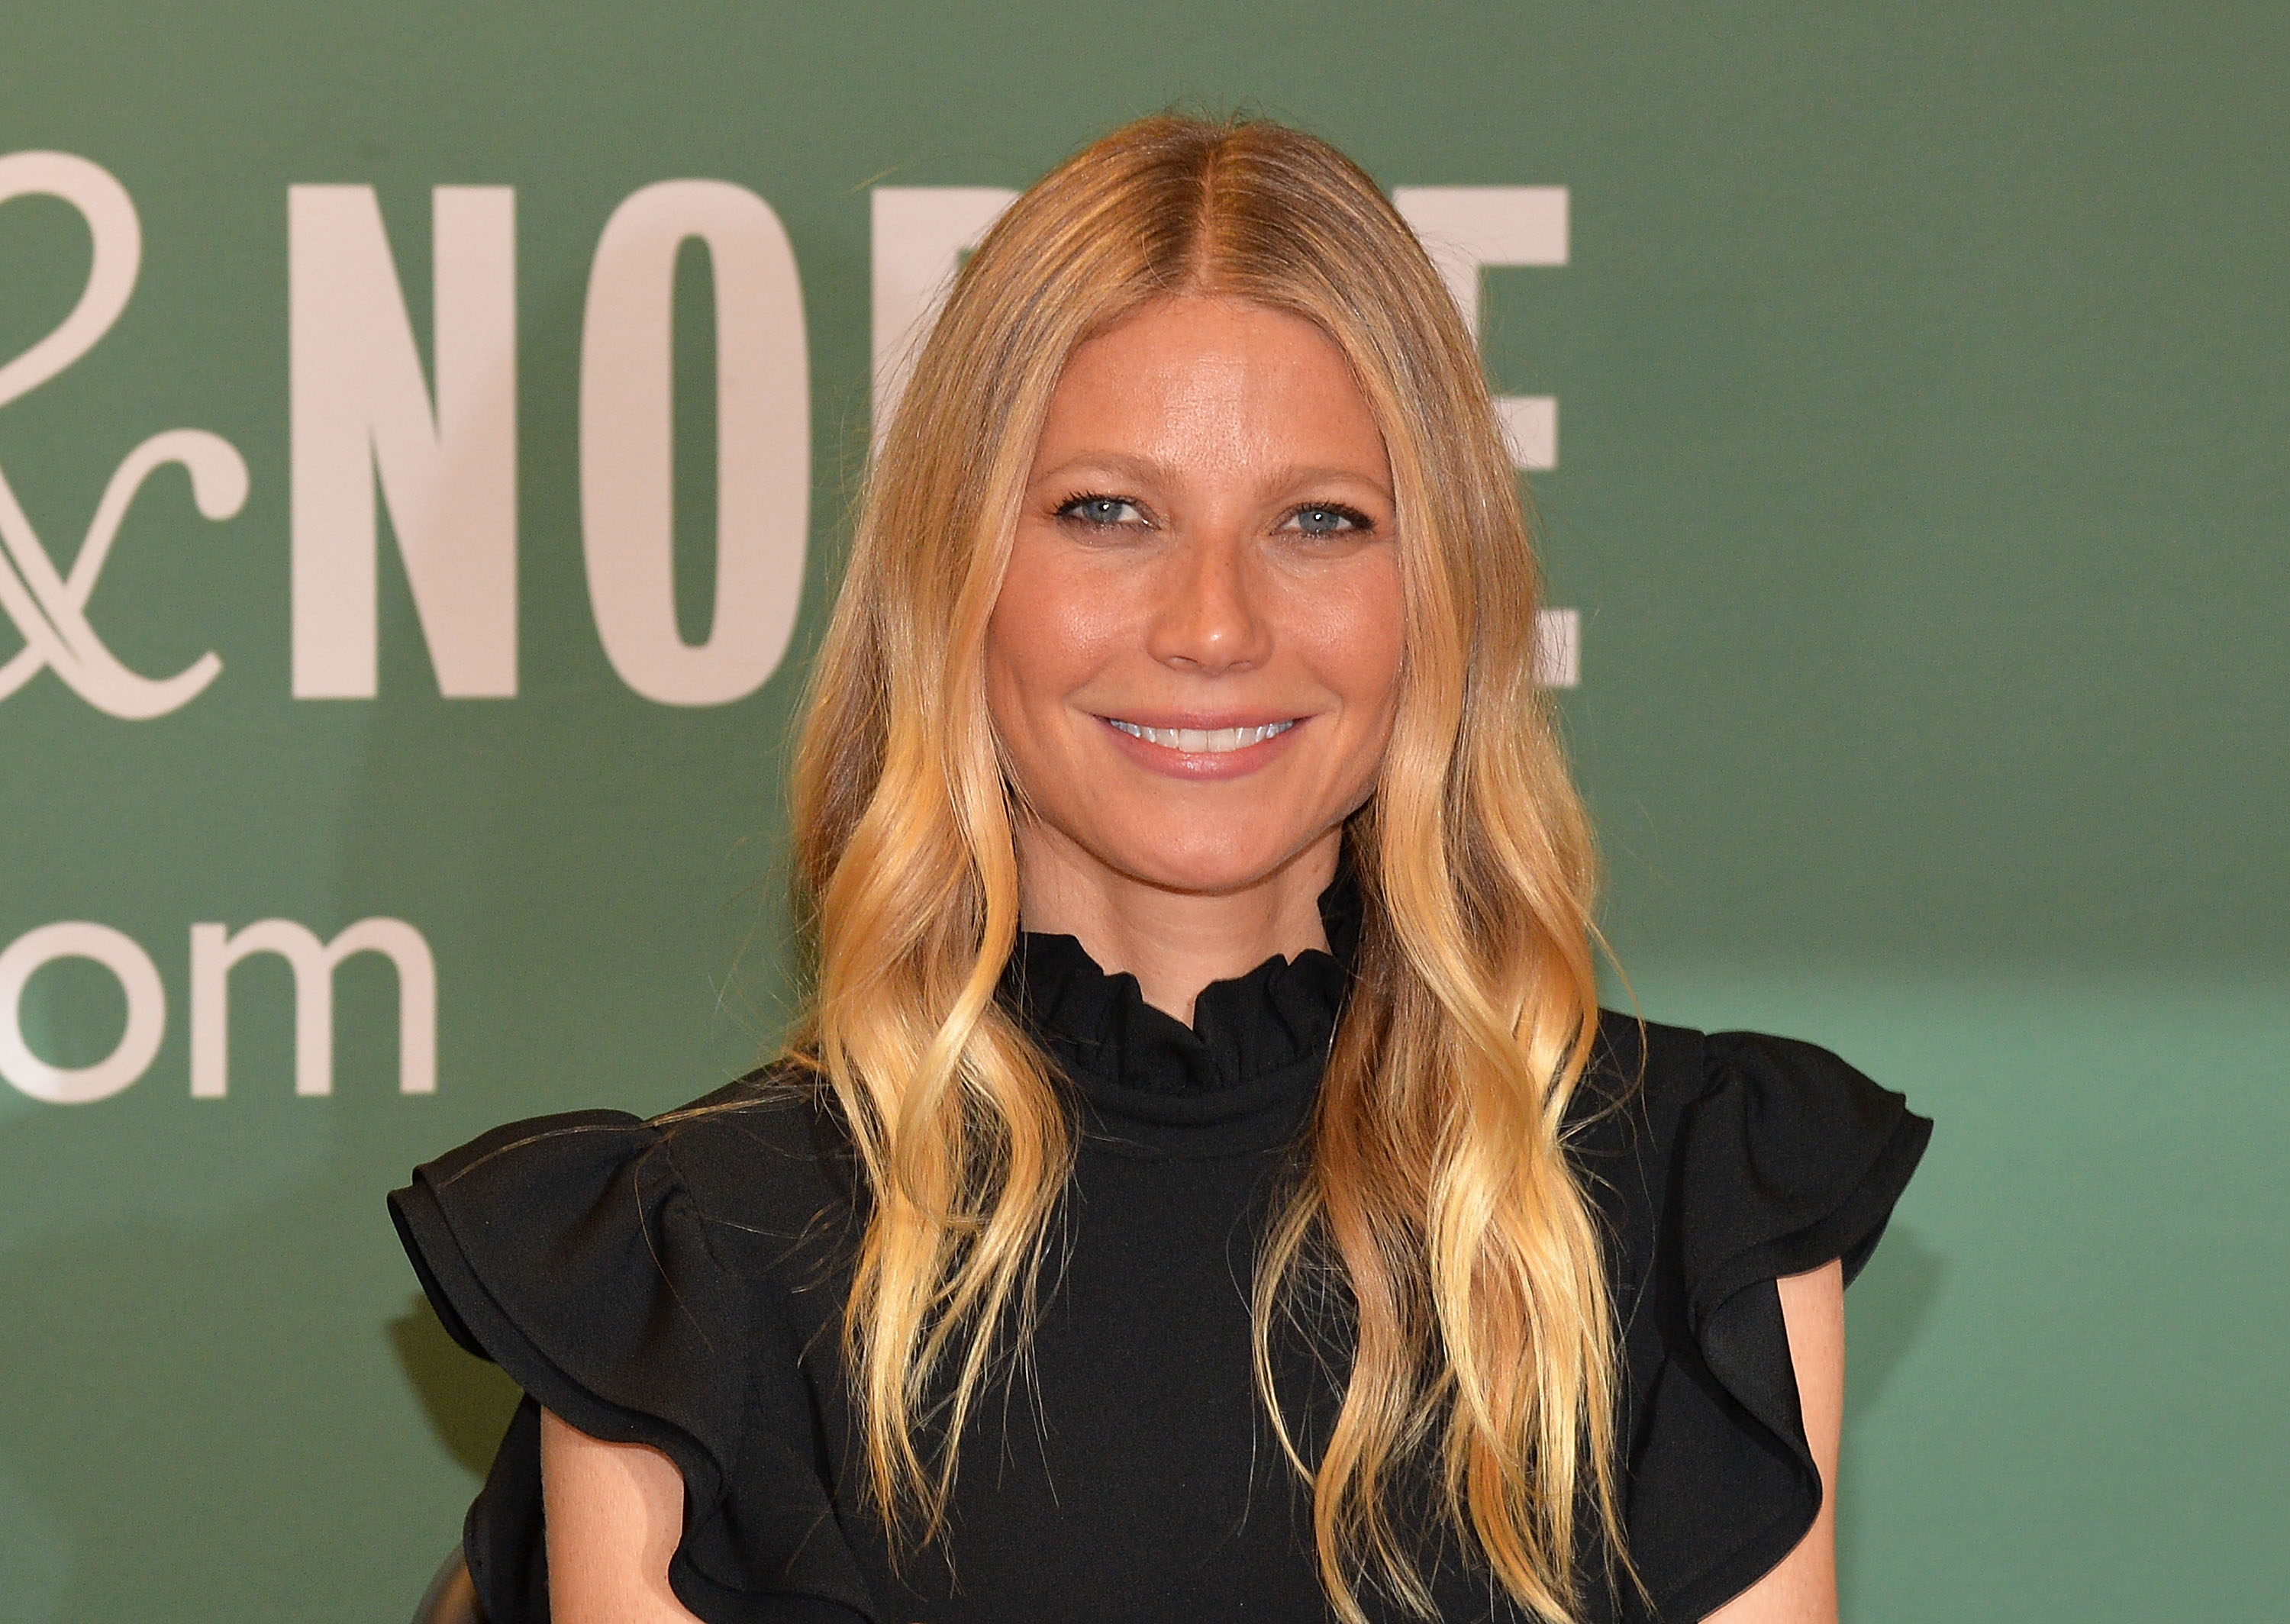 Gwyneth Paltrow and her new husband dressed up as the characters from A Star Is Born